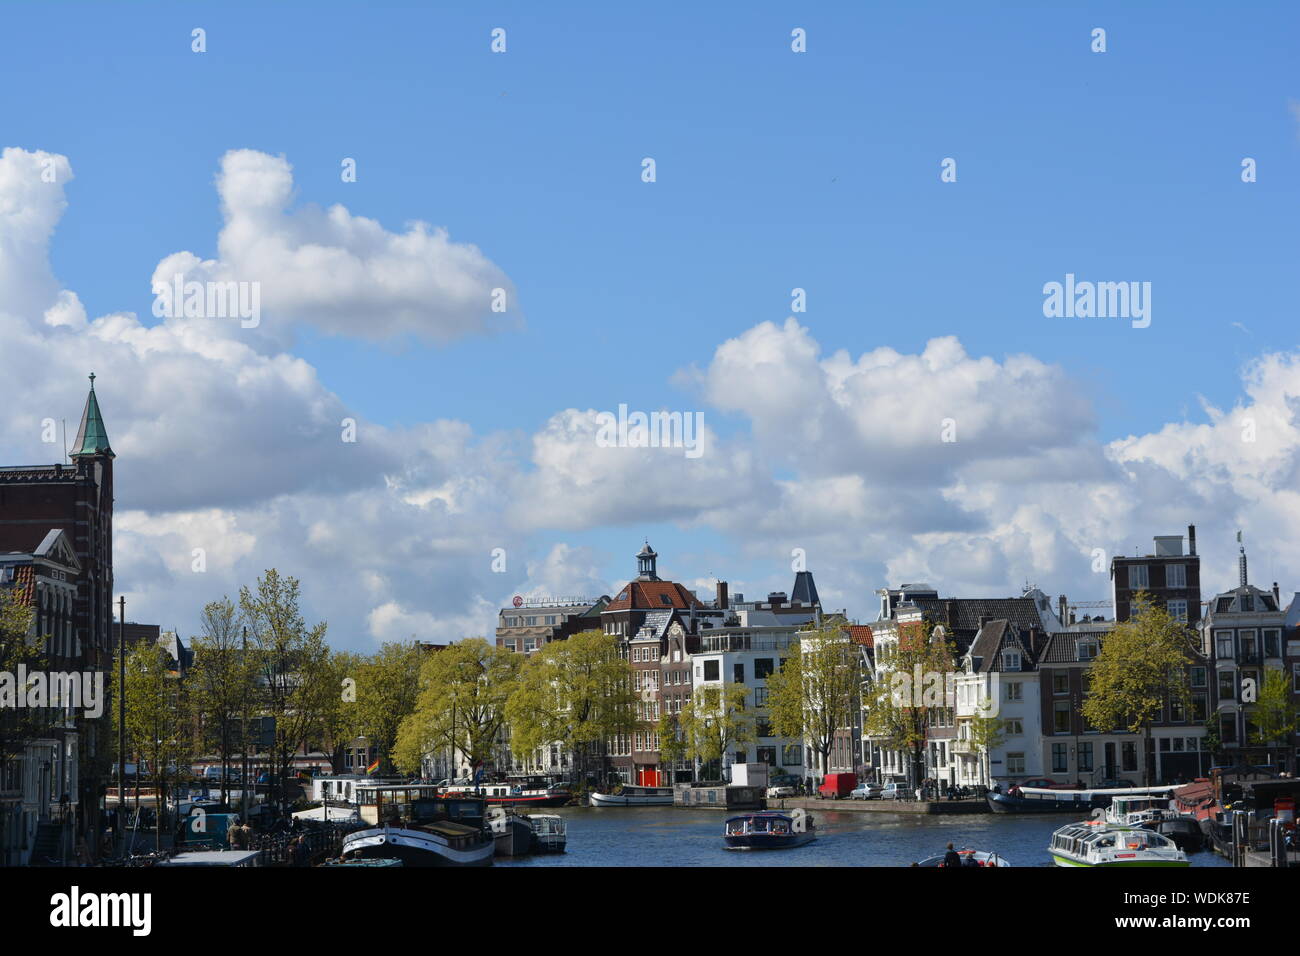 Cruise trip on canal in the Amsterdam city, Netherlands Stock Photo